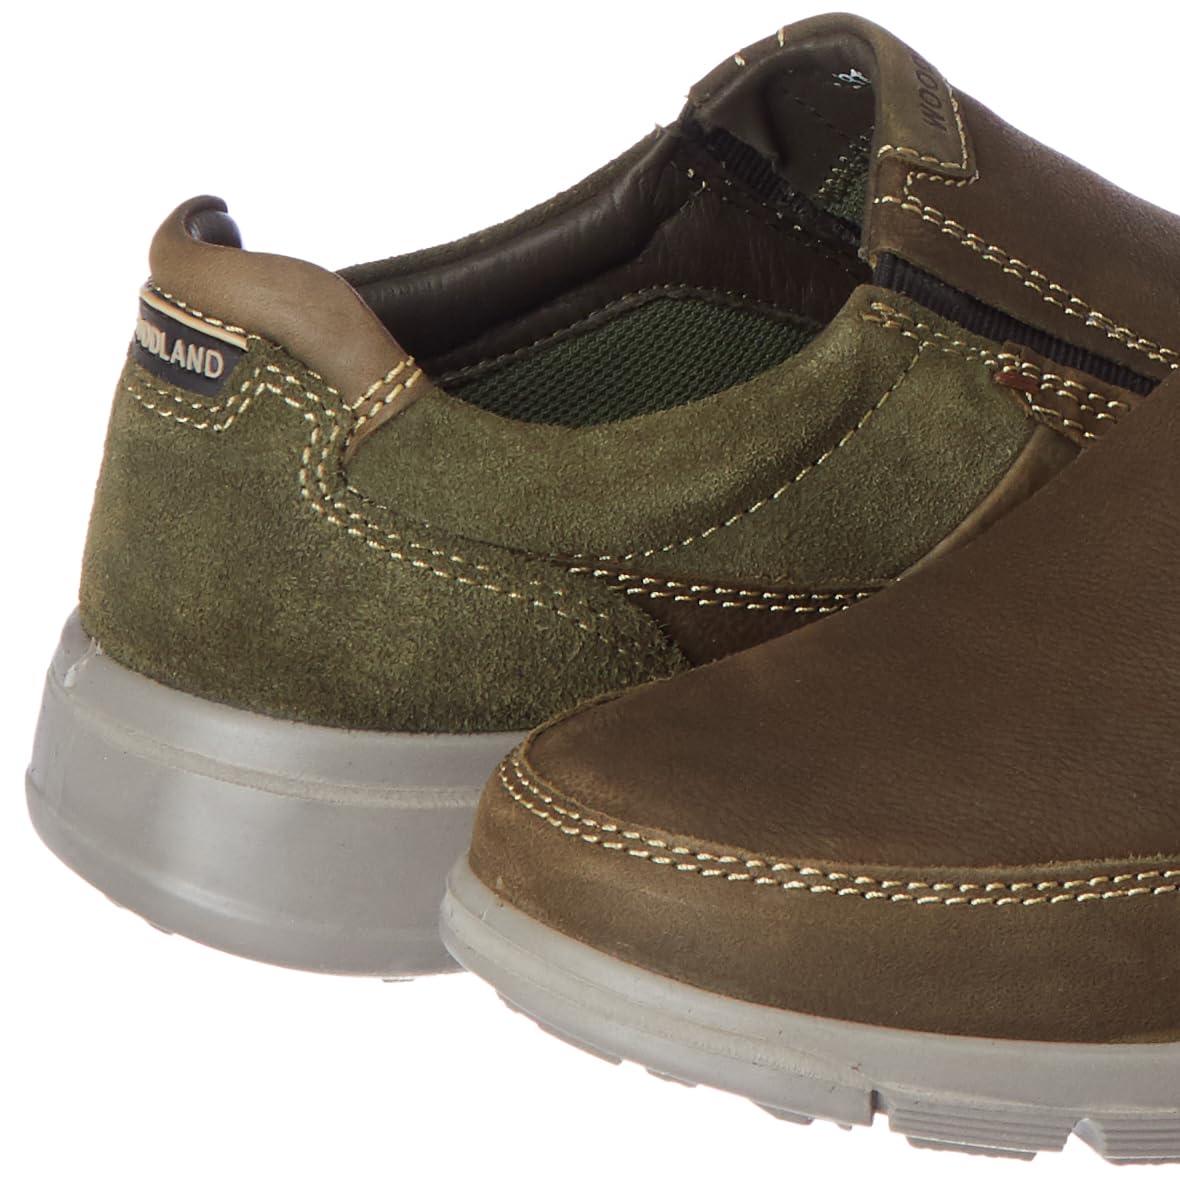 Woodland Men's Olive Green Leather Casual Shoes-10 UK (44 EU) (GC 3816121)